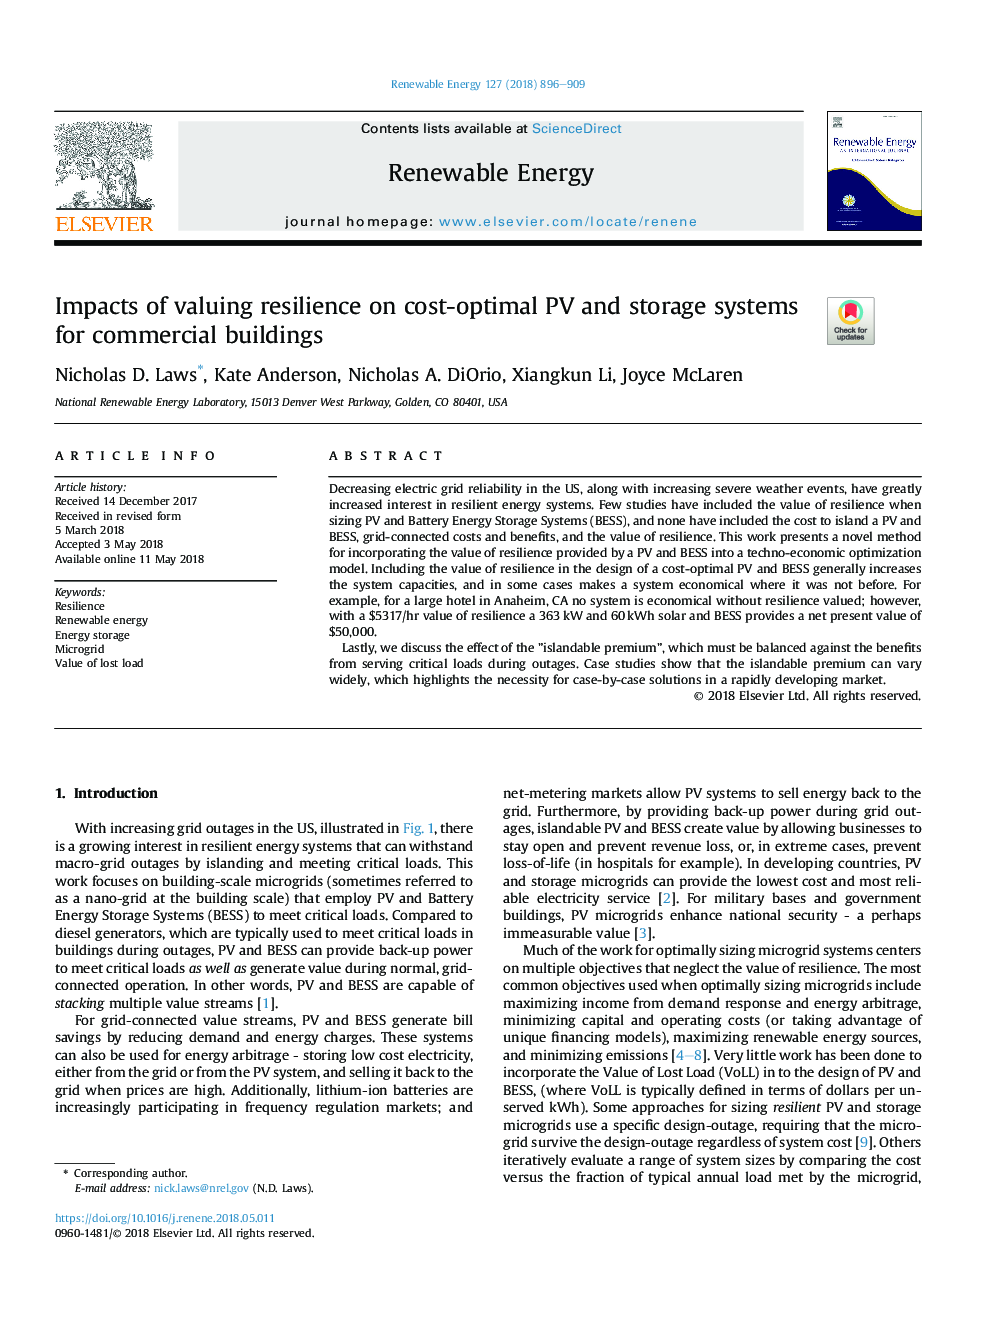 Impacts of valuing resilience on cost-optimal PV and storage systems for commercial buildings